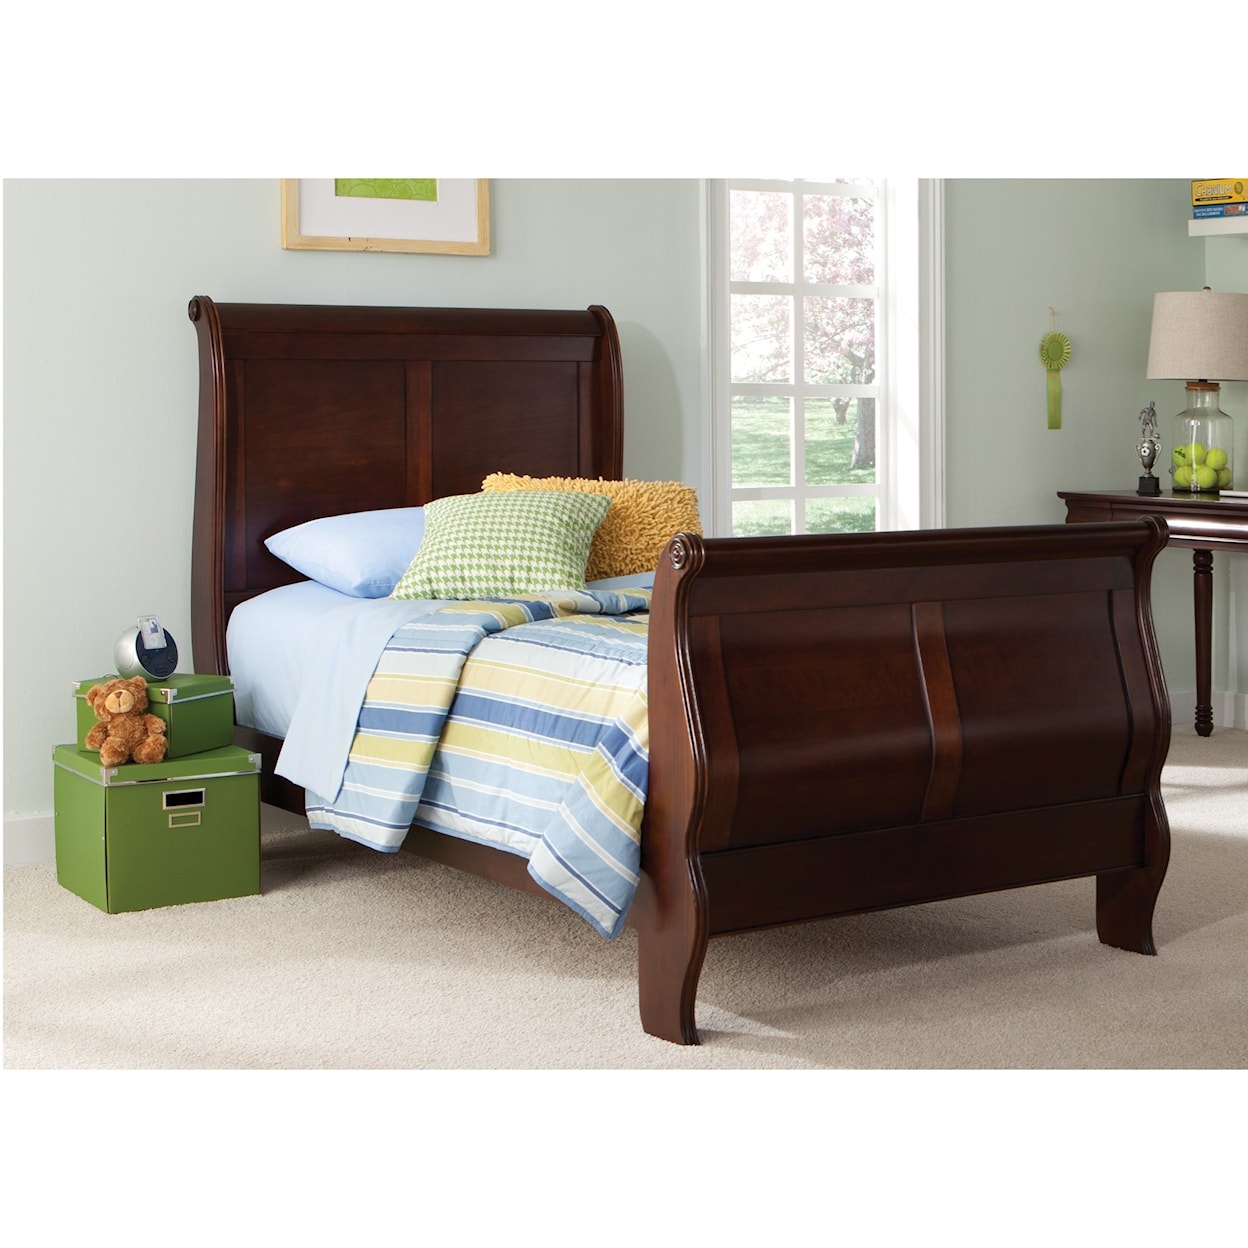 Liberty Furniture Carriage Court Twin Sleigh Bed